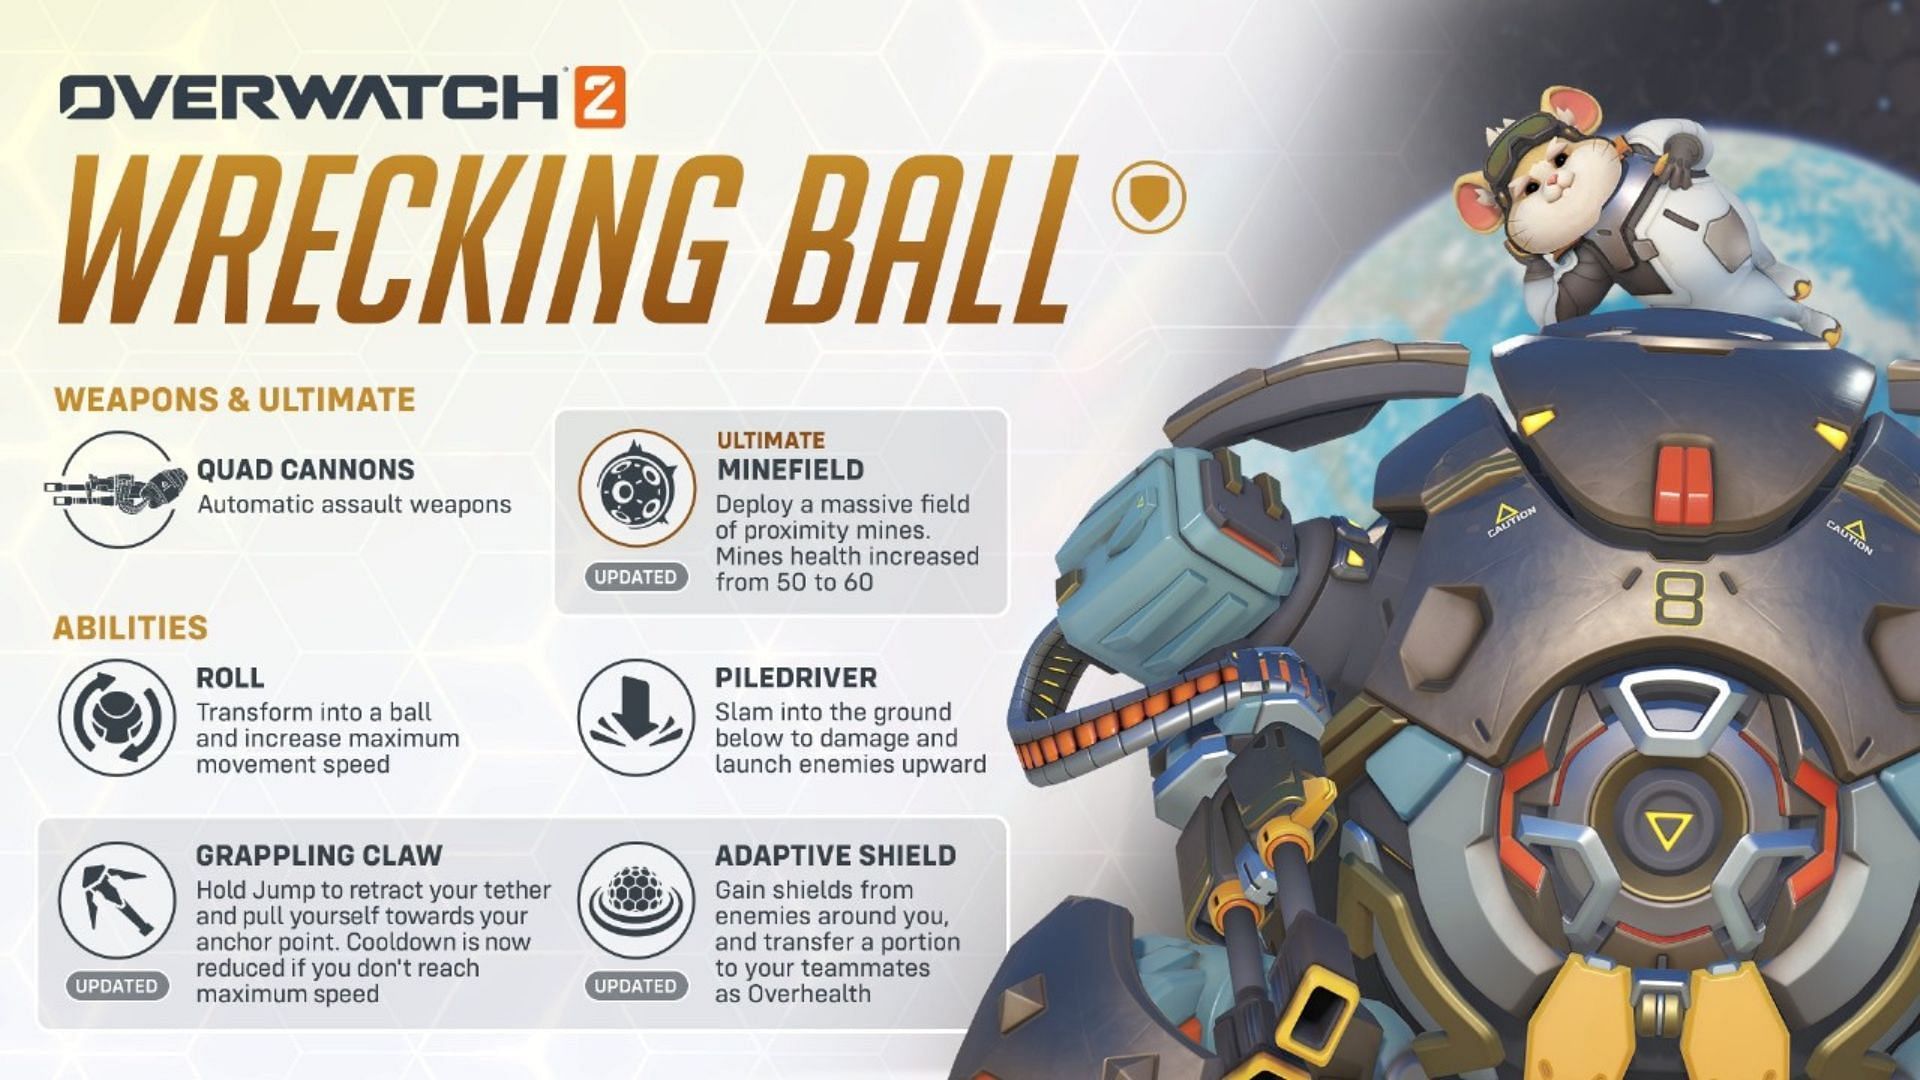 Wrecking ball&#039;s reworked abilities in Overwatch 2 (Image via Blizzard Entertainment)